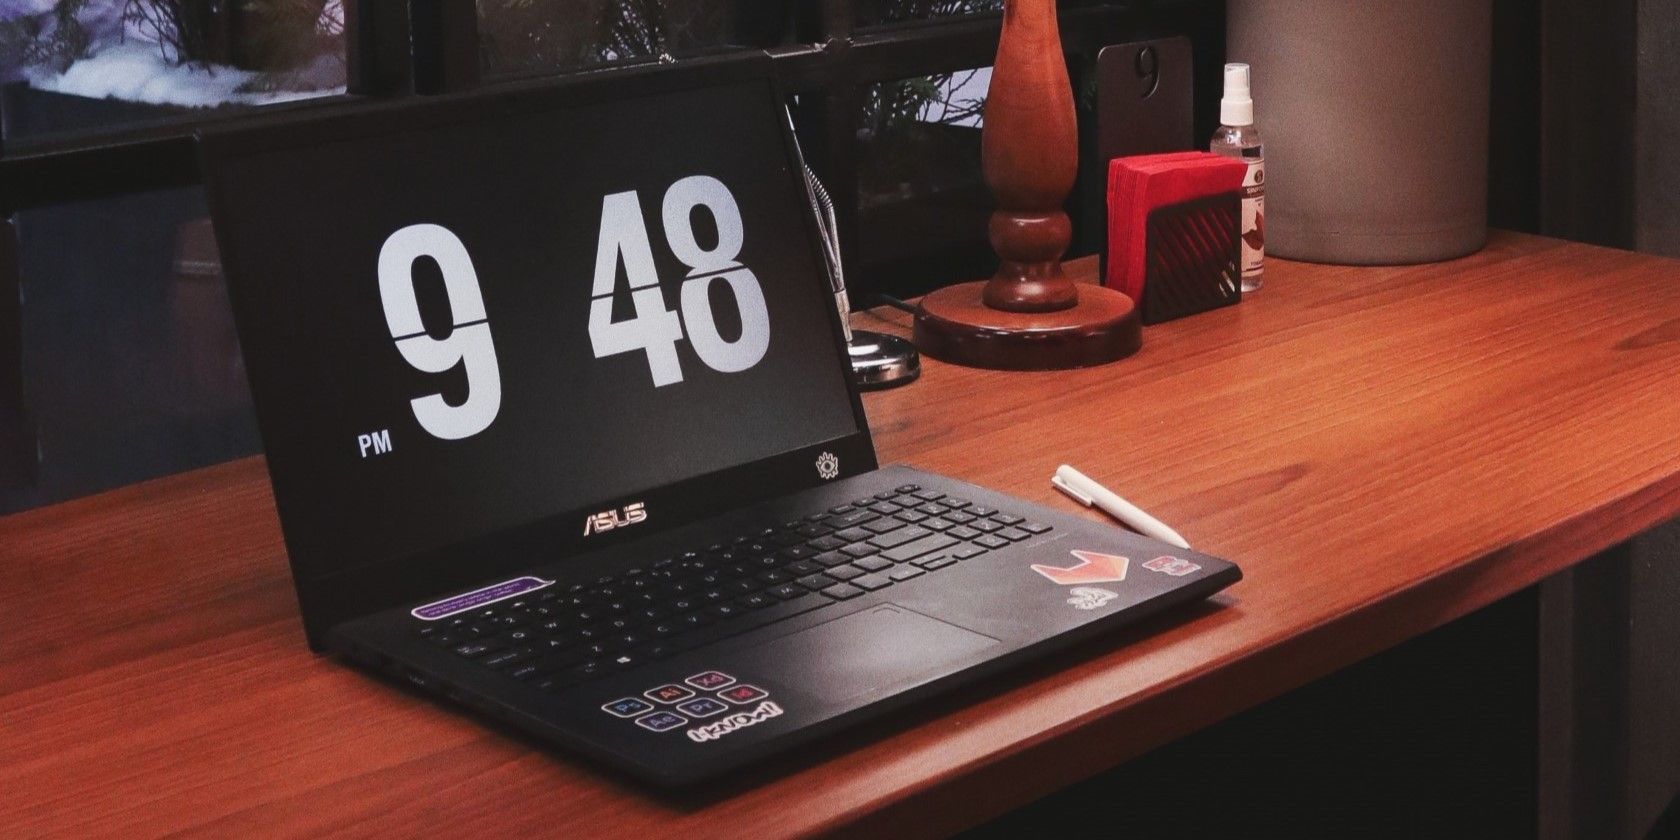 A black Asus laptop on a wooden table